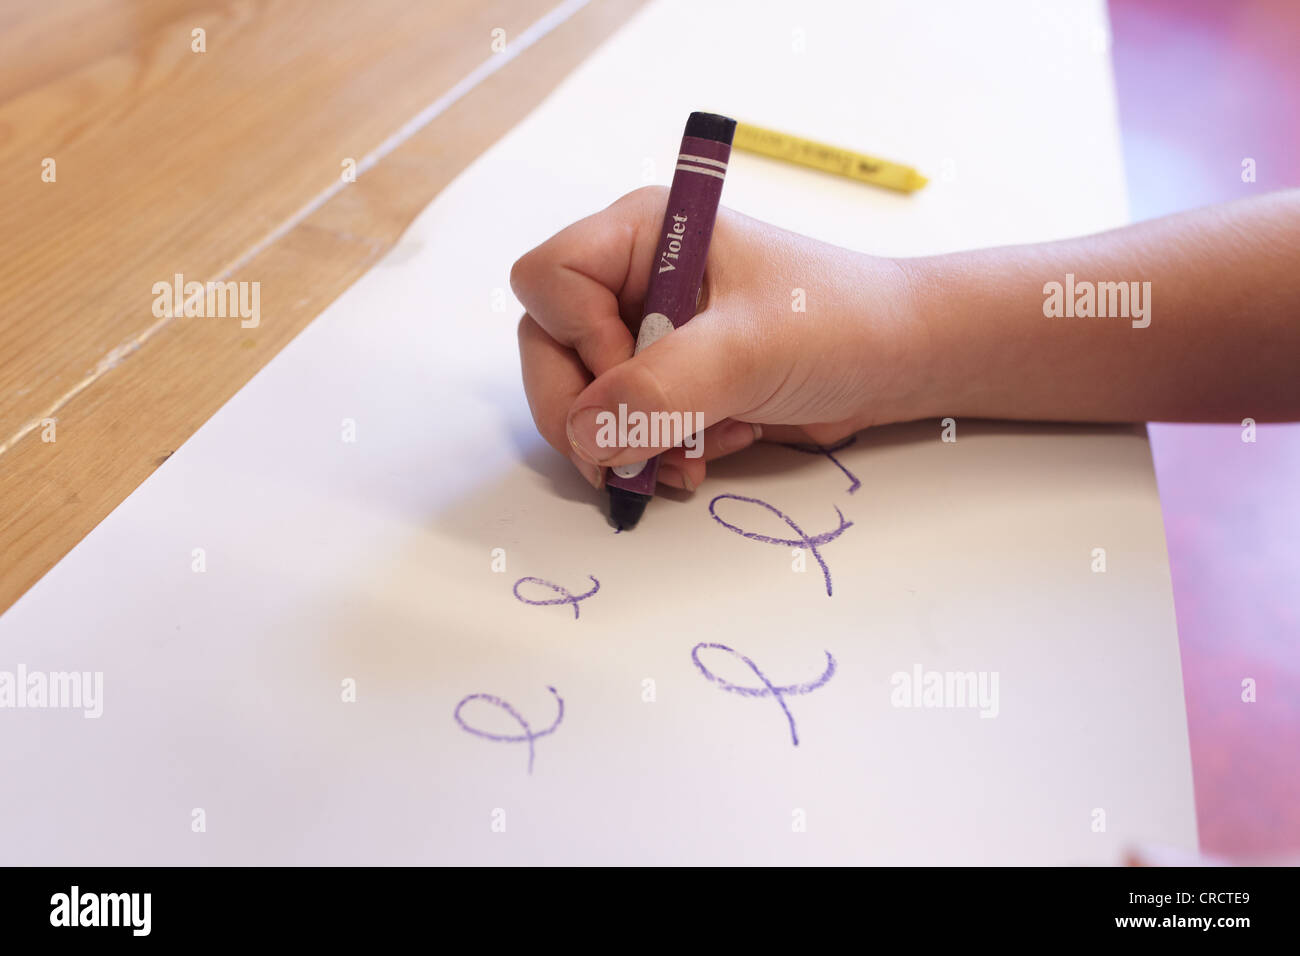 Student of the second grade of elementary school learning how to write, cursive handwriting, Niederwerth, Rhineland-Palatinate Stock Photo